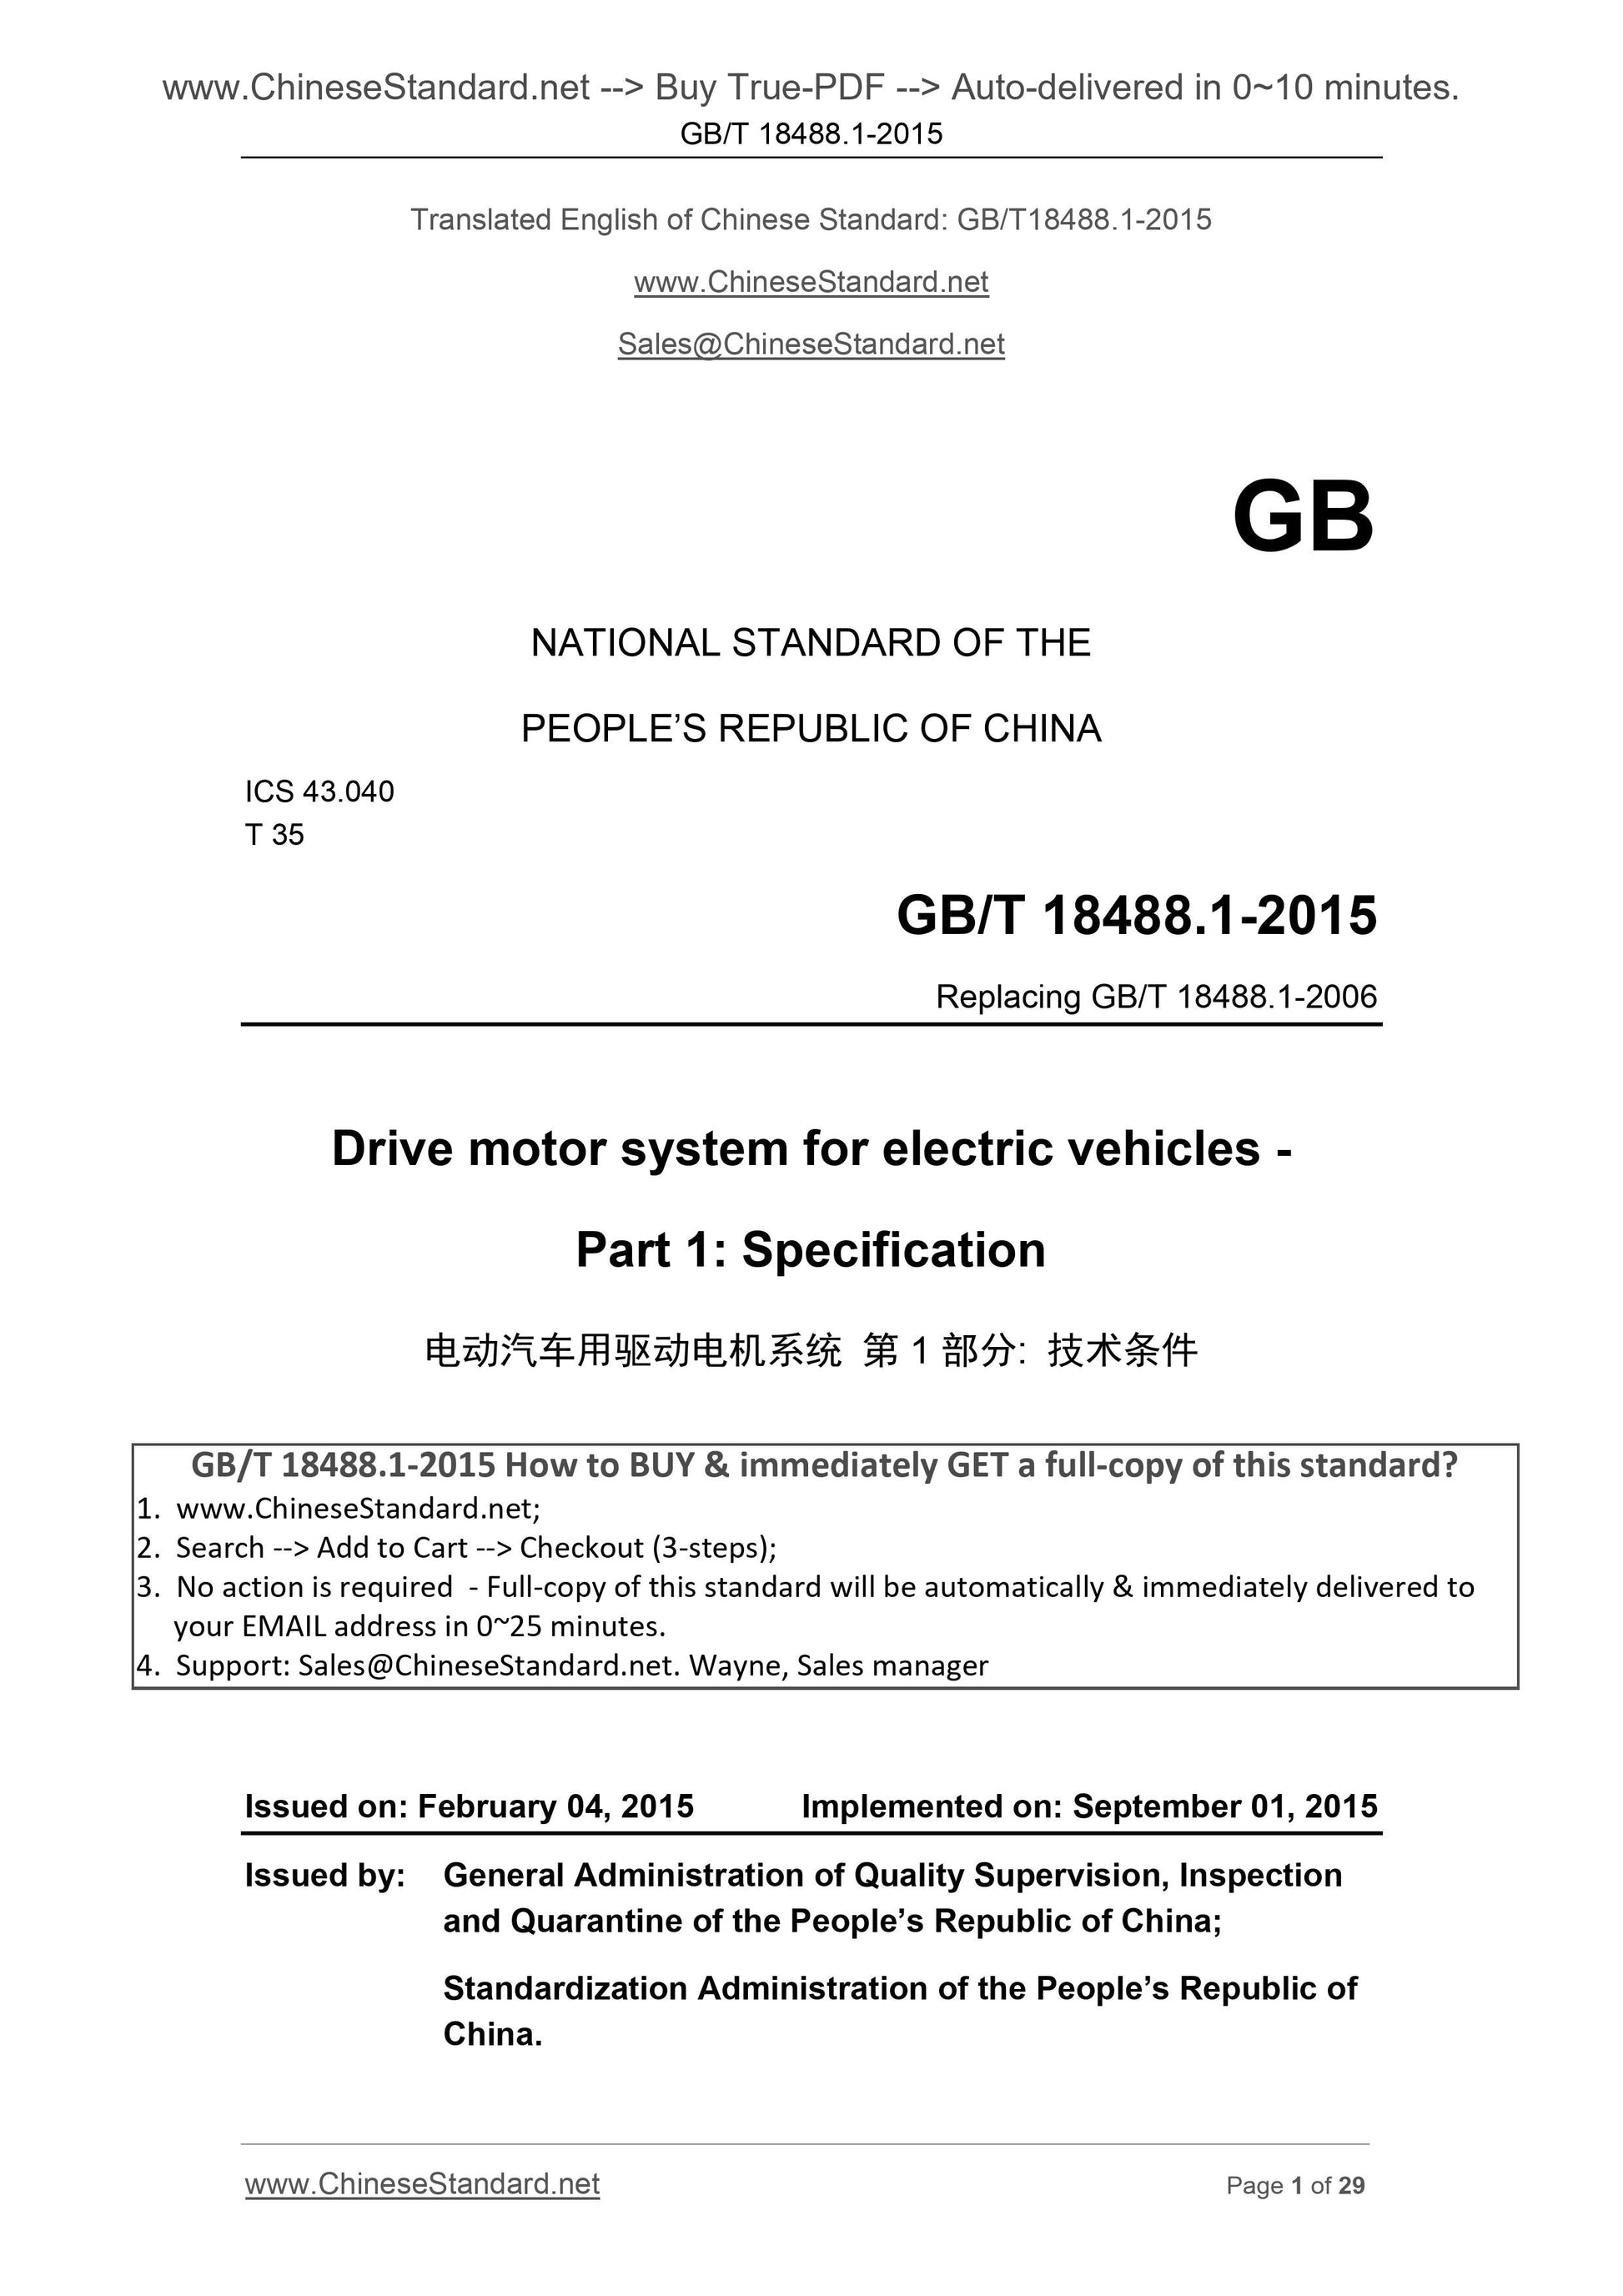 GB/T 18488.1-2015 Page 1